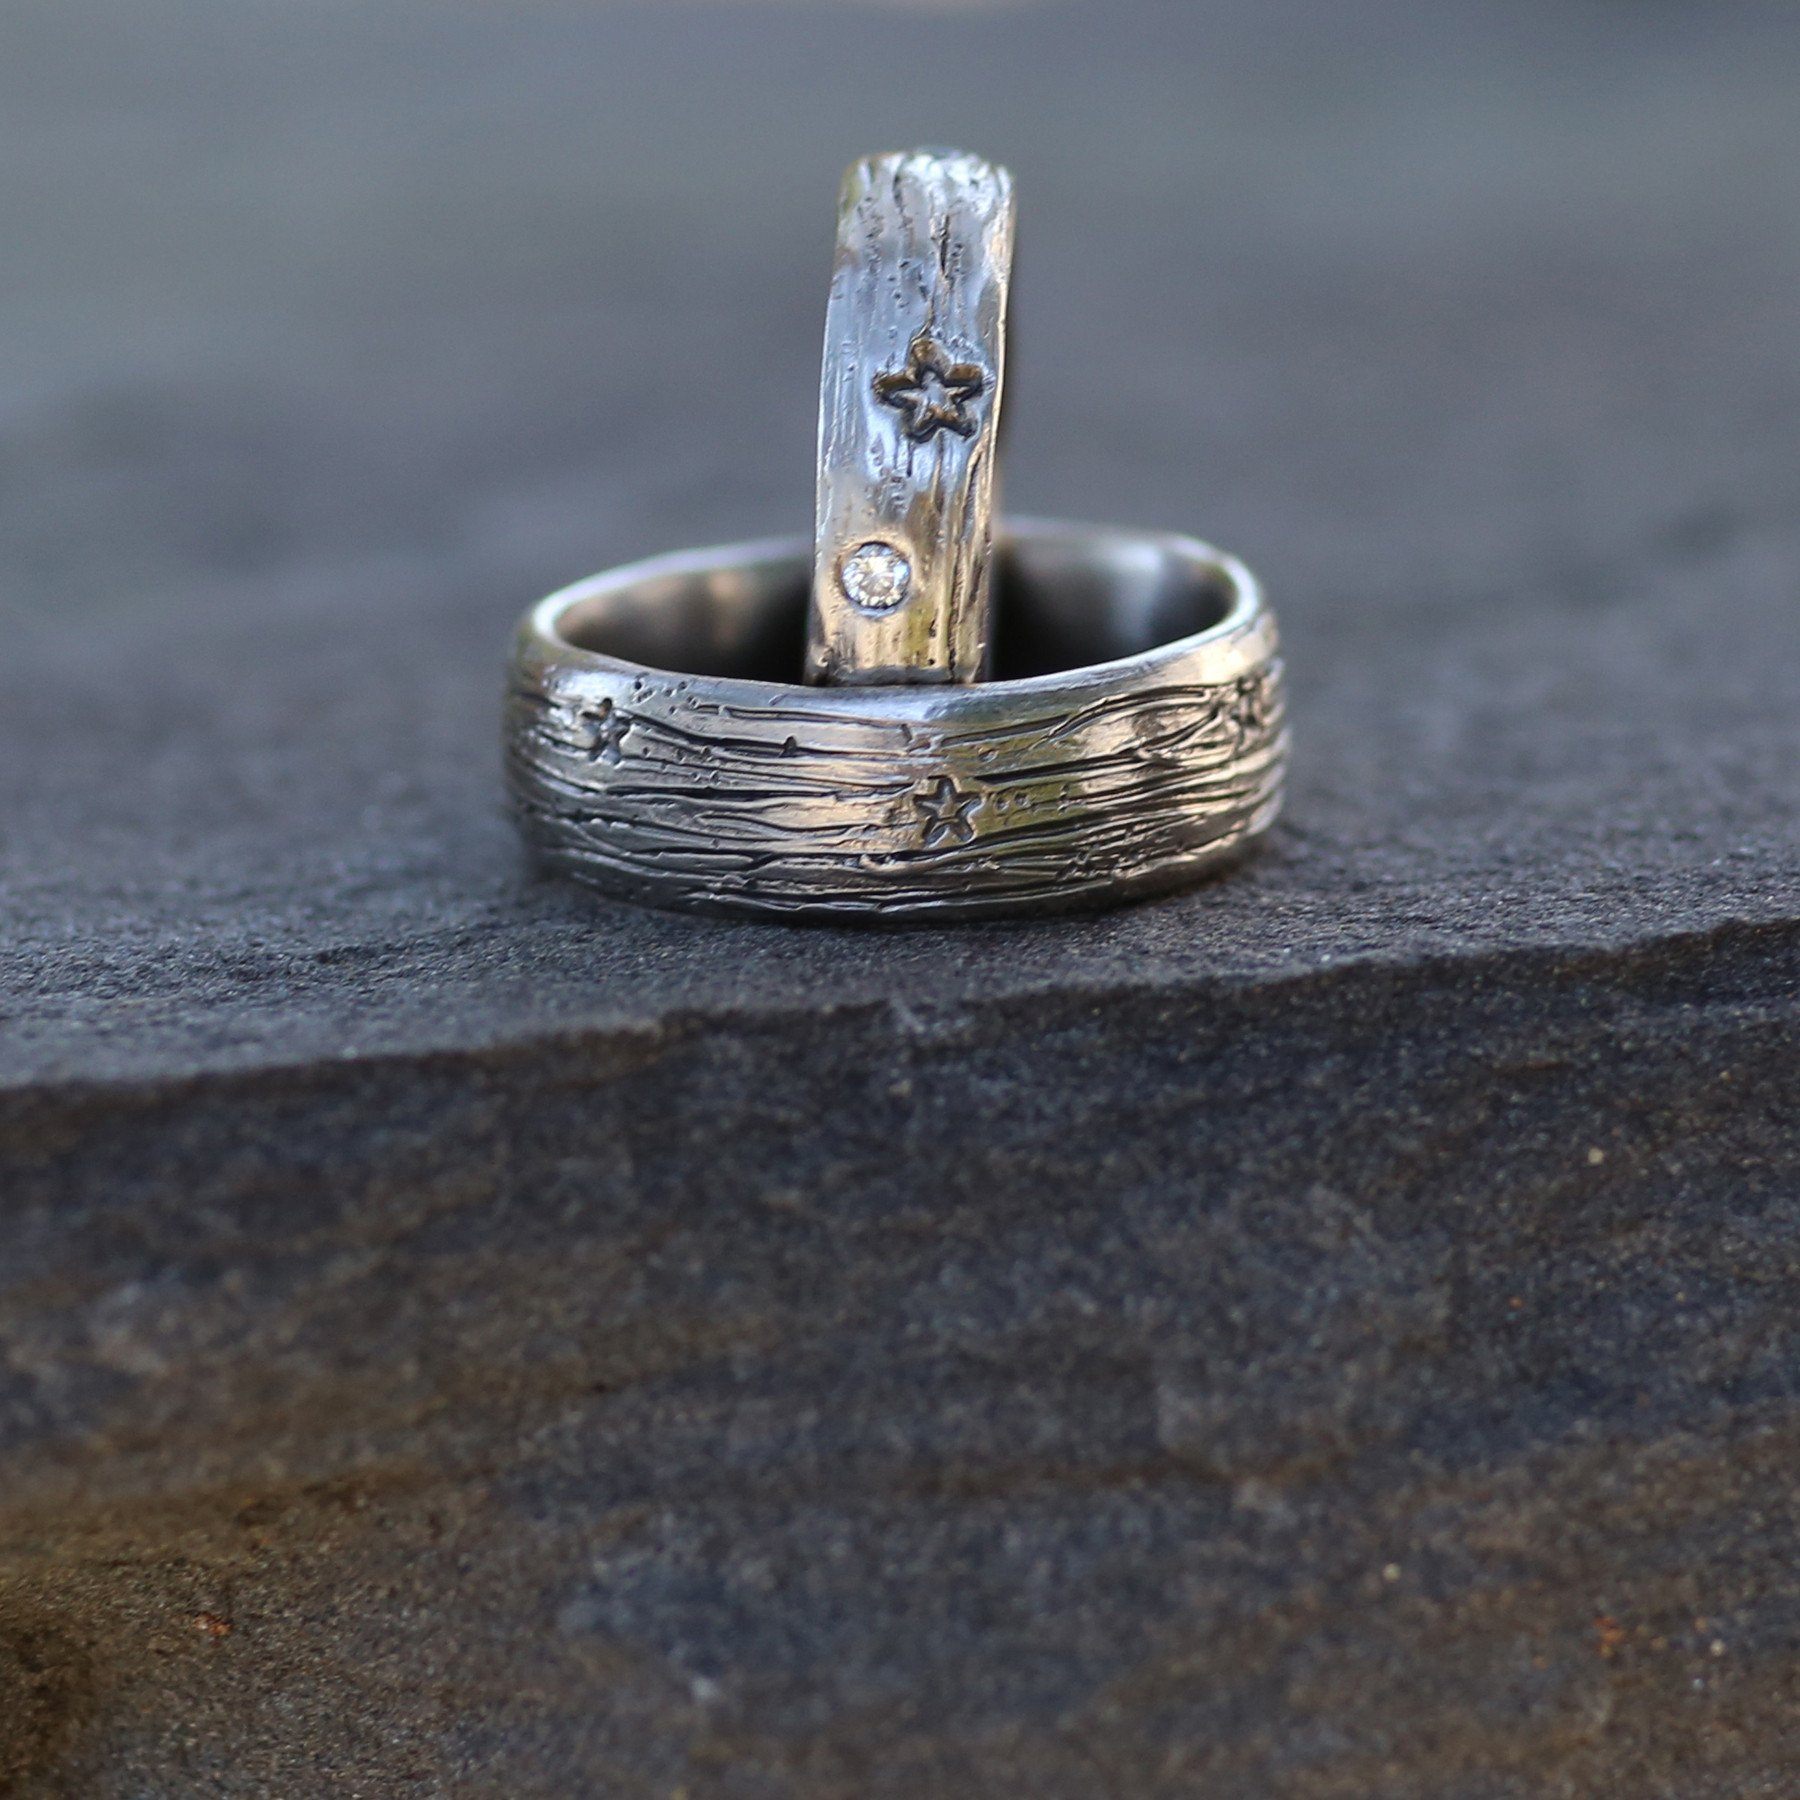 Galaxy Ring in Palladium/Silver - Made to Order